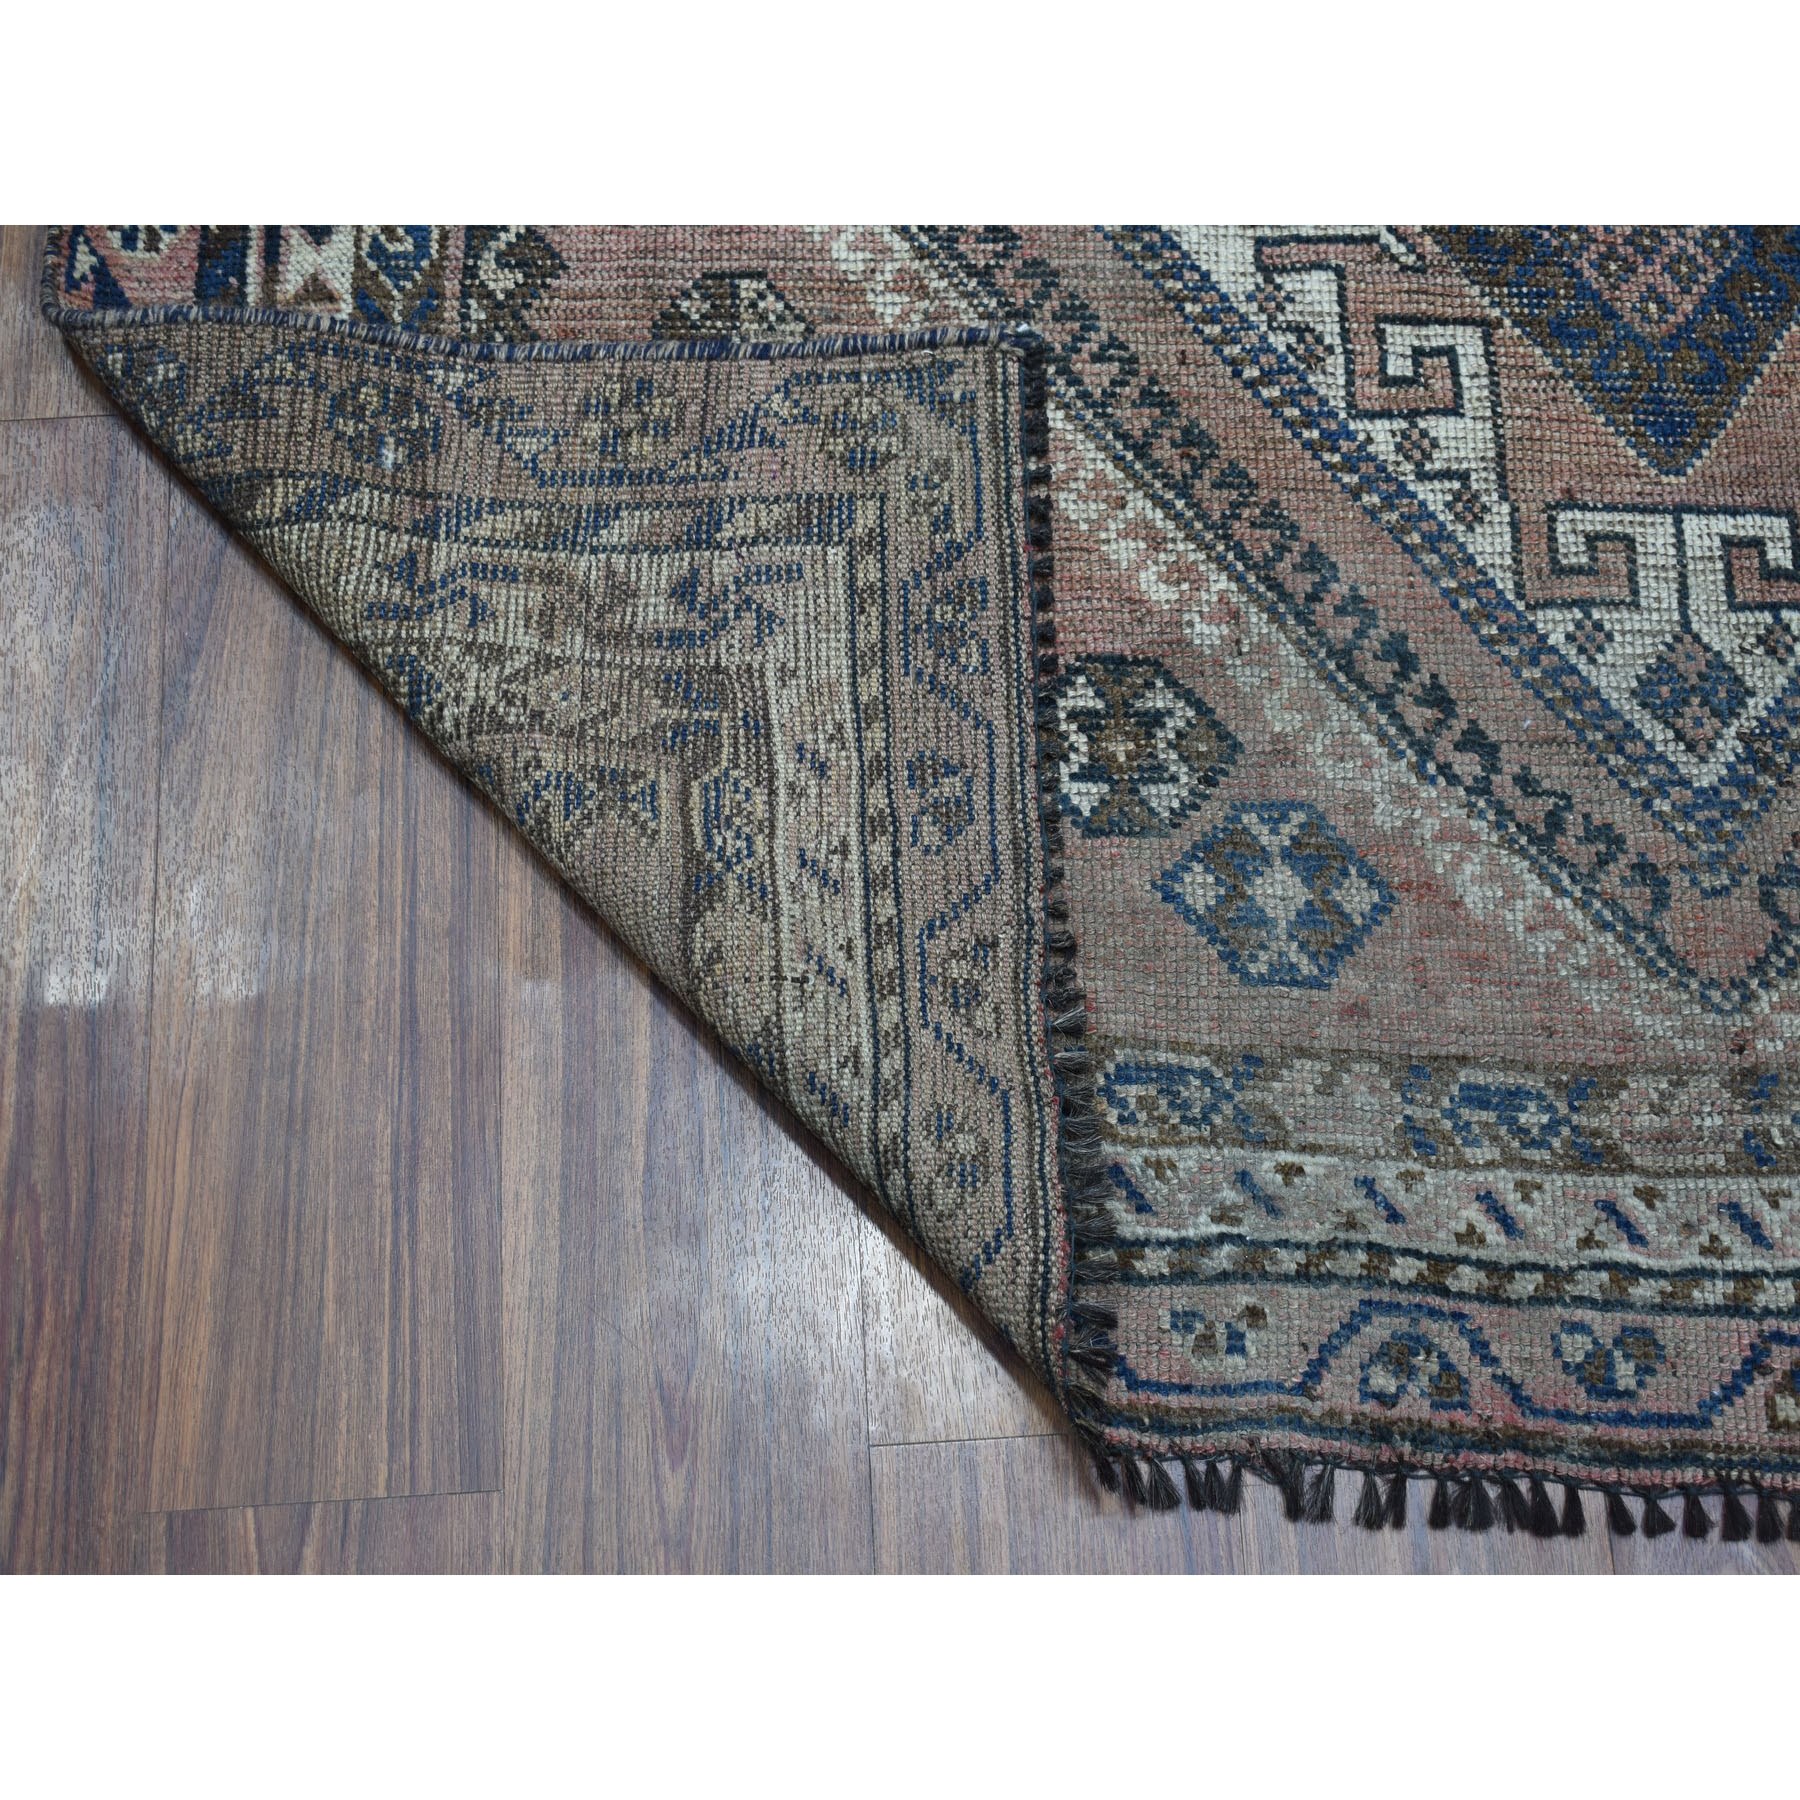 5-1 x7-5  Vintage And Worn Down Distressed Colors Persian Shiraz Hand Knotted Bohemian Rug 